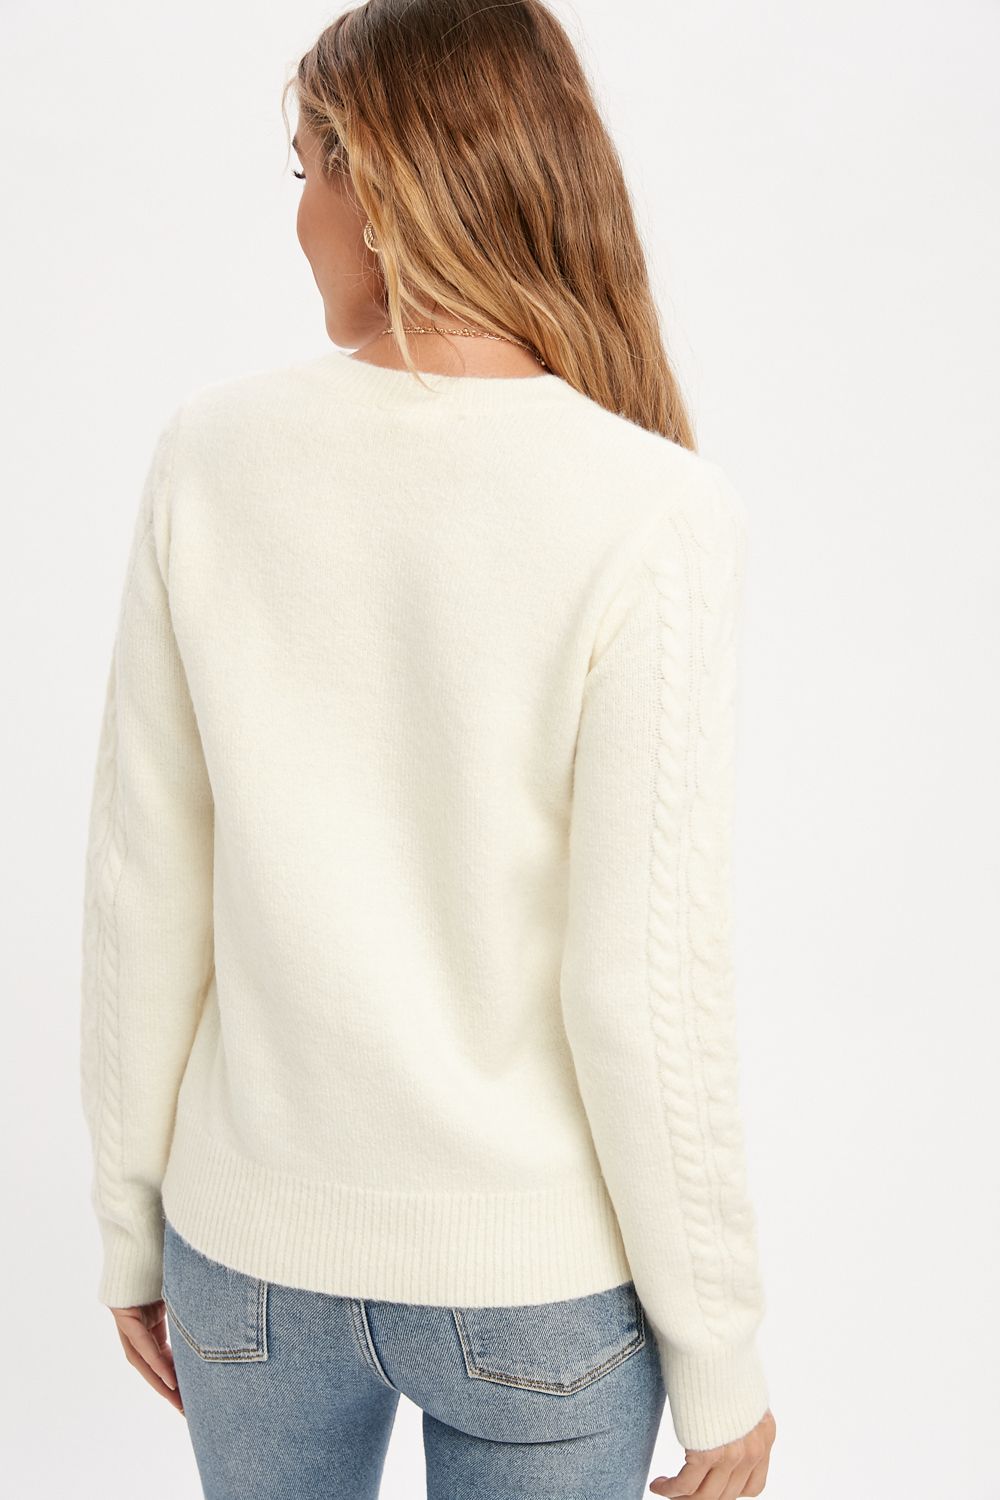 Mystree Easy Everyday Pullover Sweater